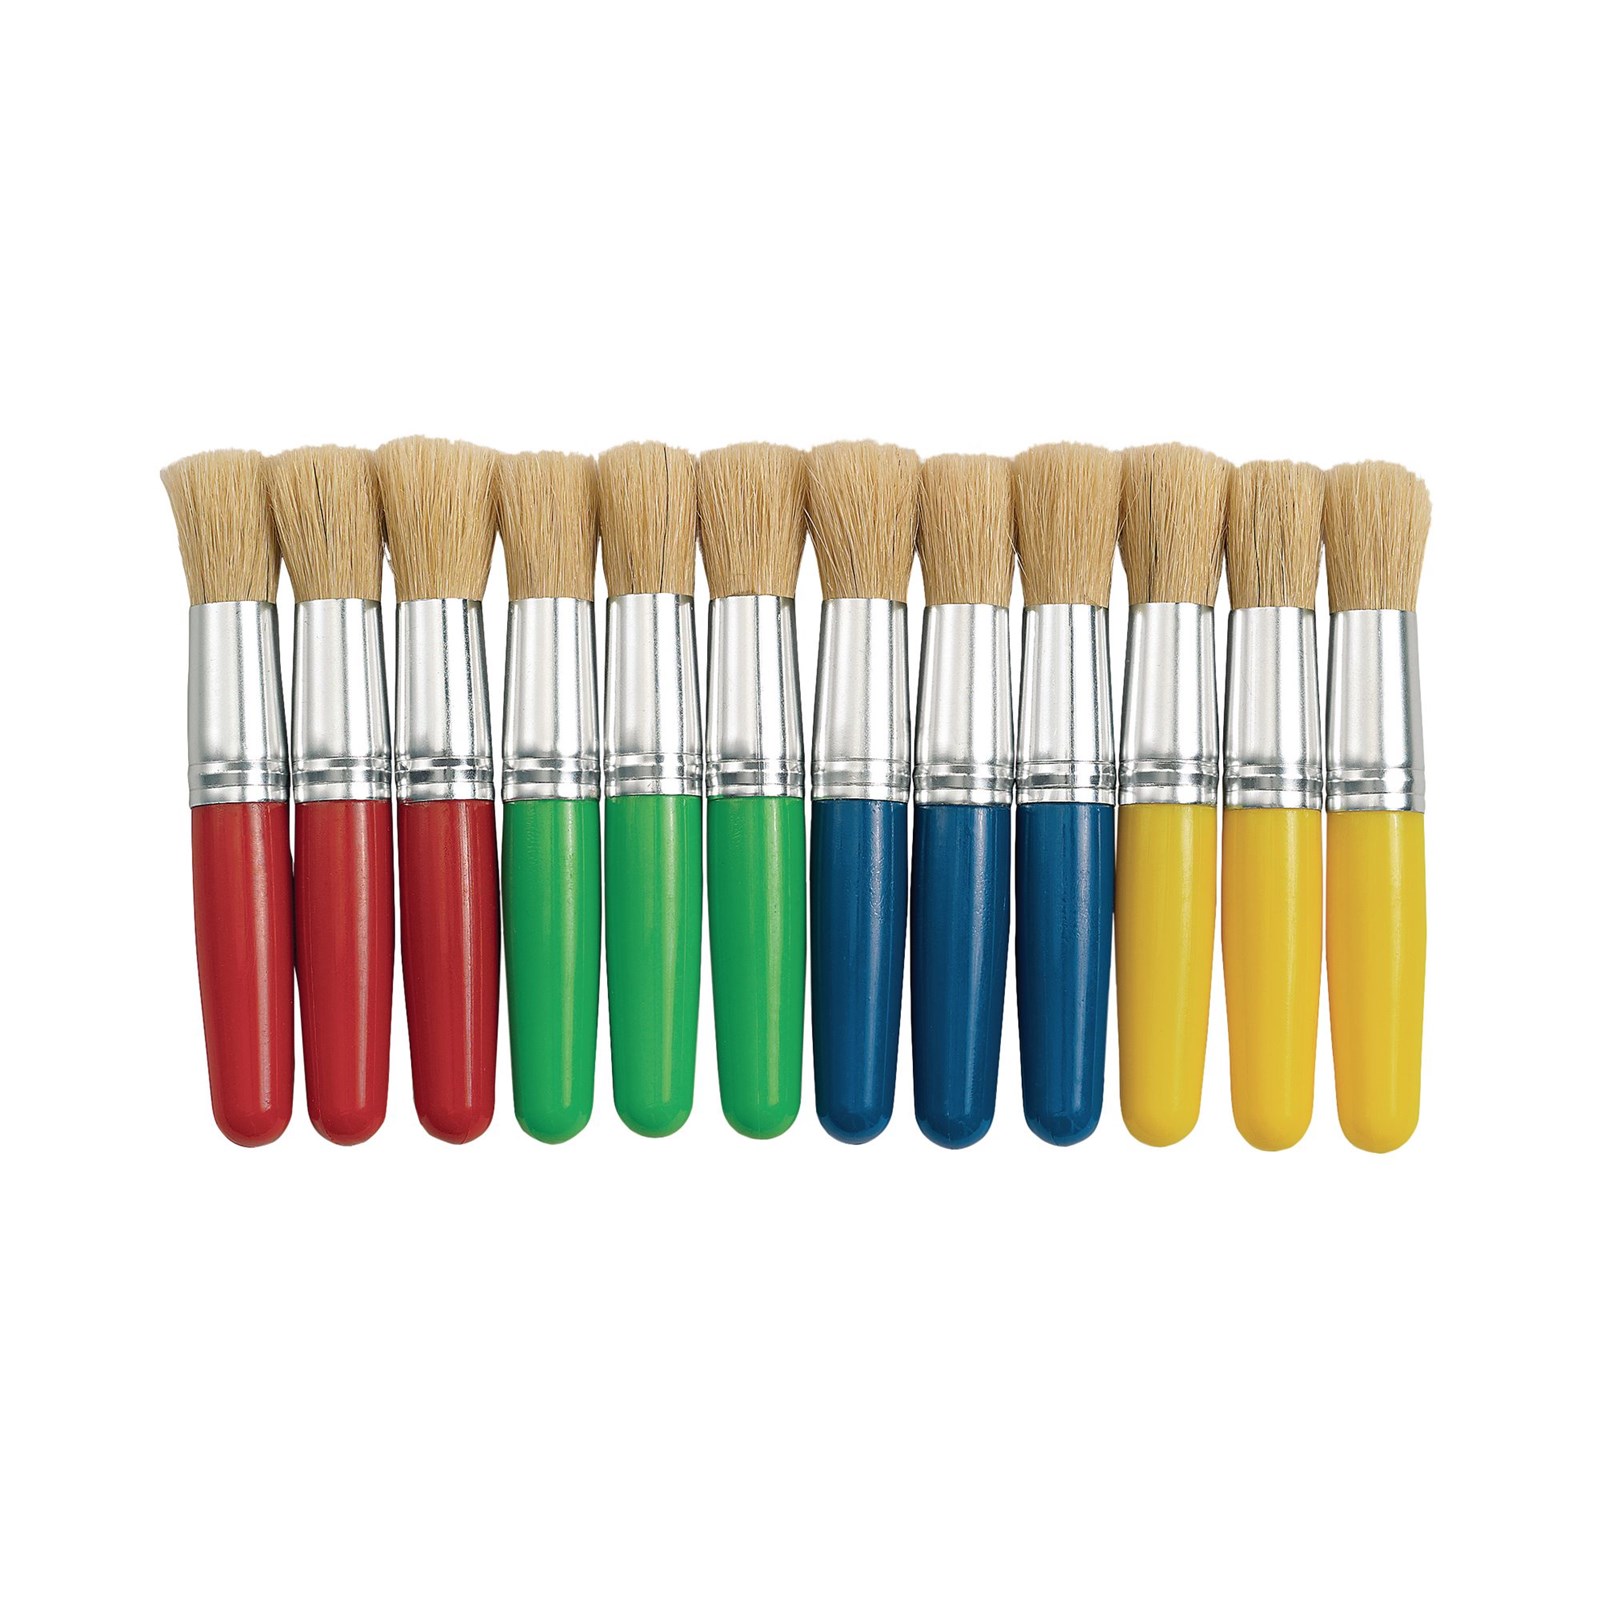 Stubby Chubby Paint Brushes - Pack of 12 | Findel International